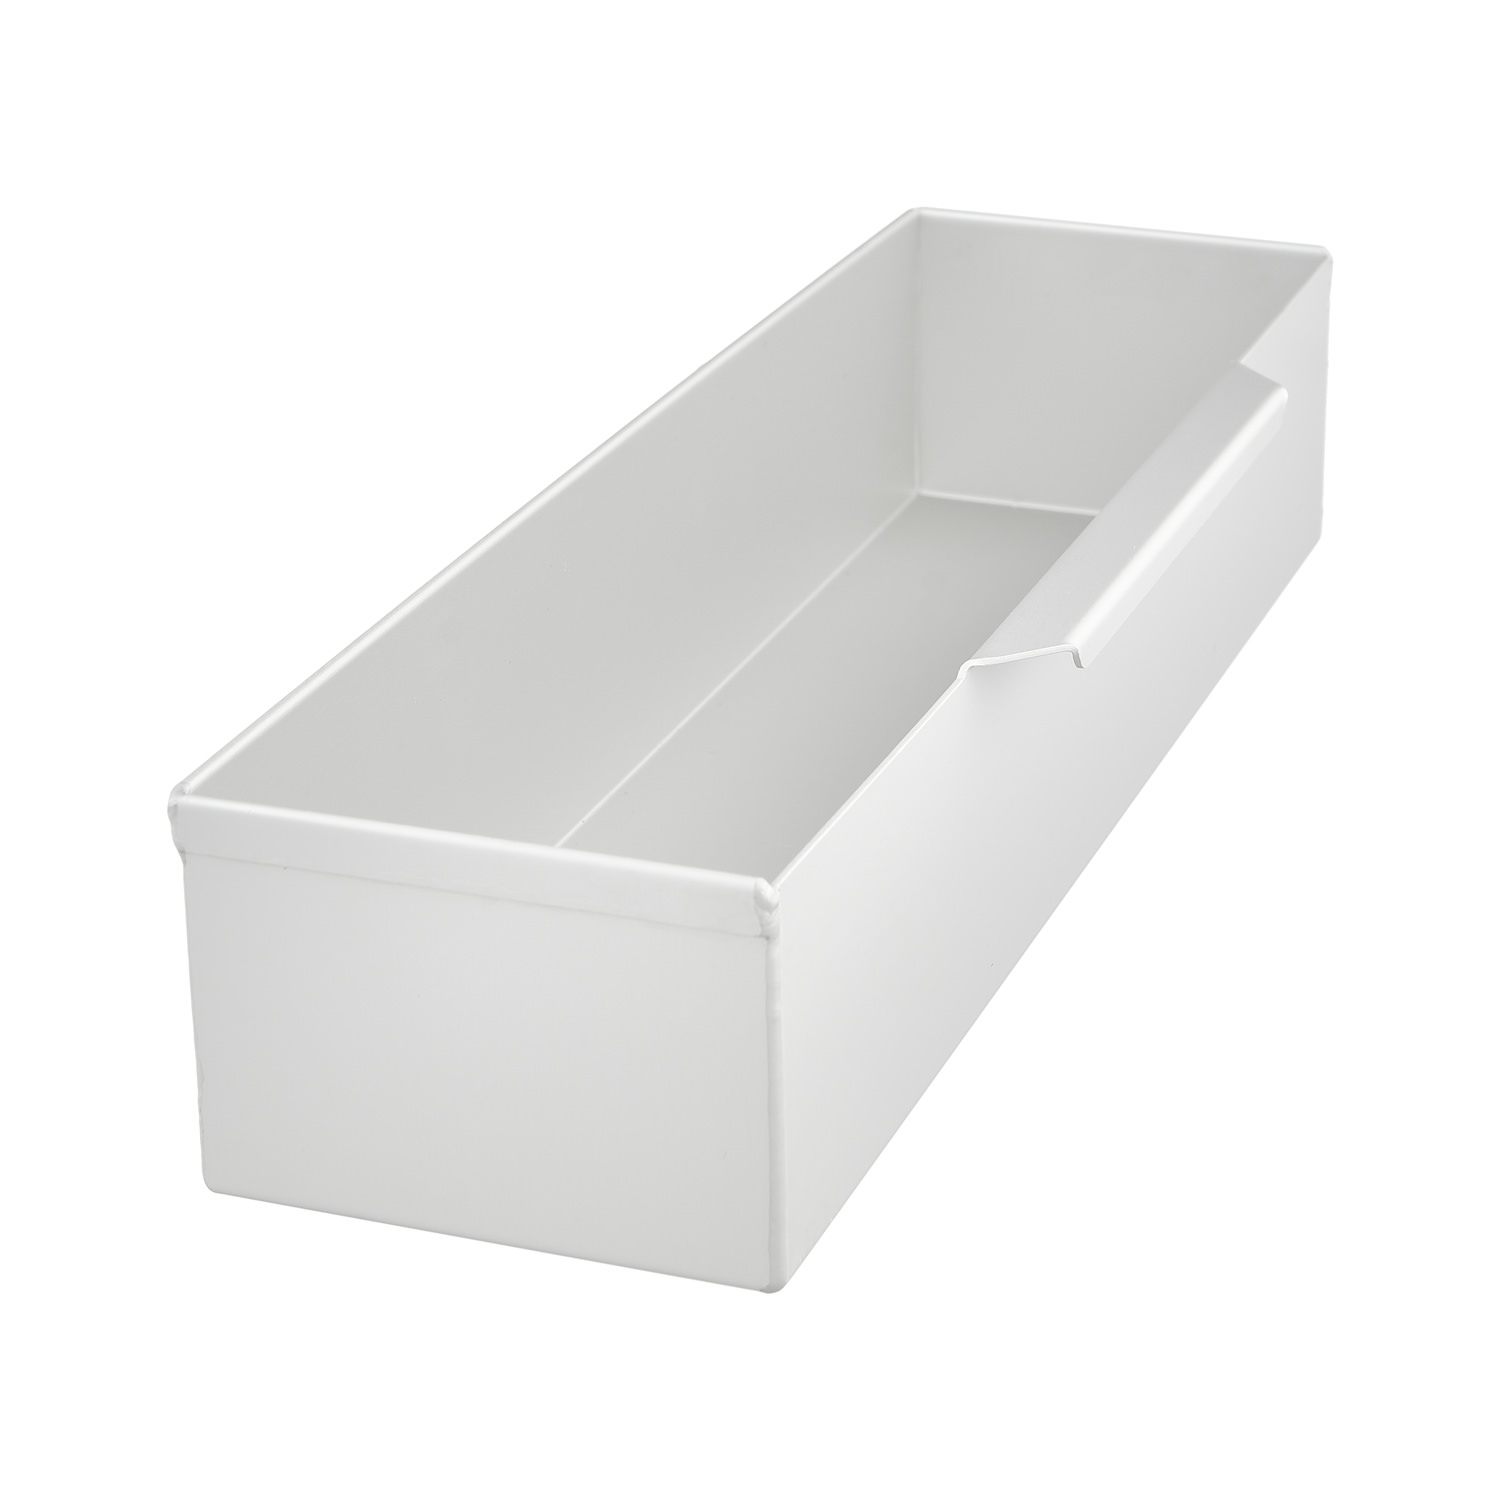 Sidebox for Airline Trolleys 40.0 x 11.0 x 8.0 cm